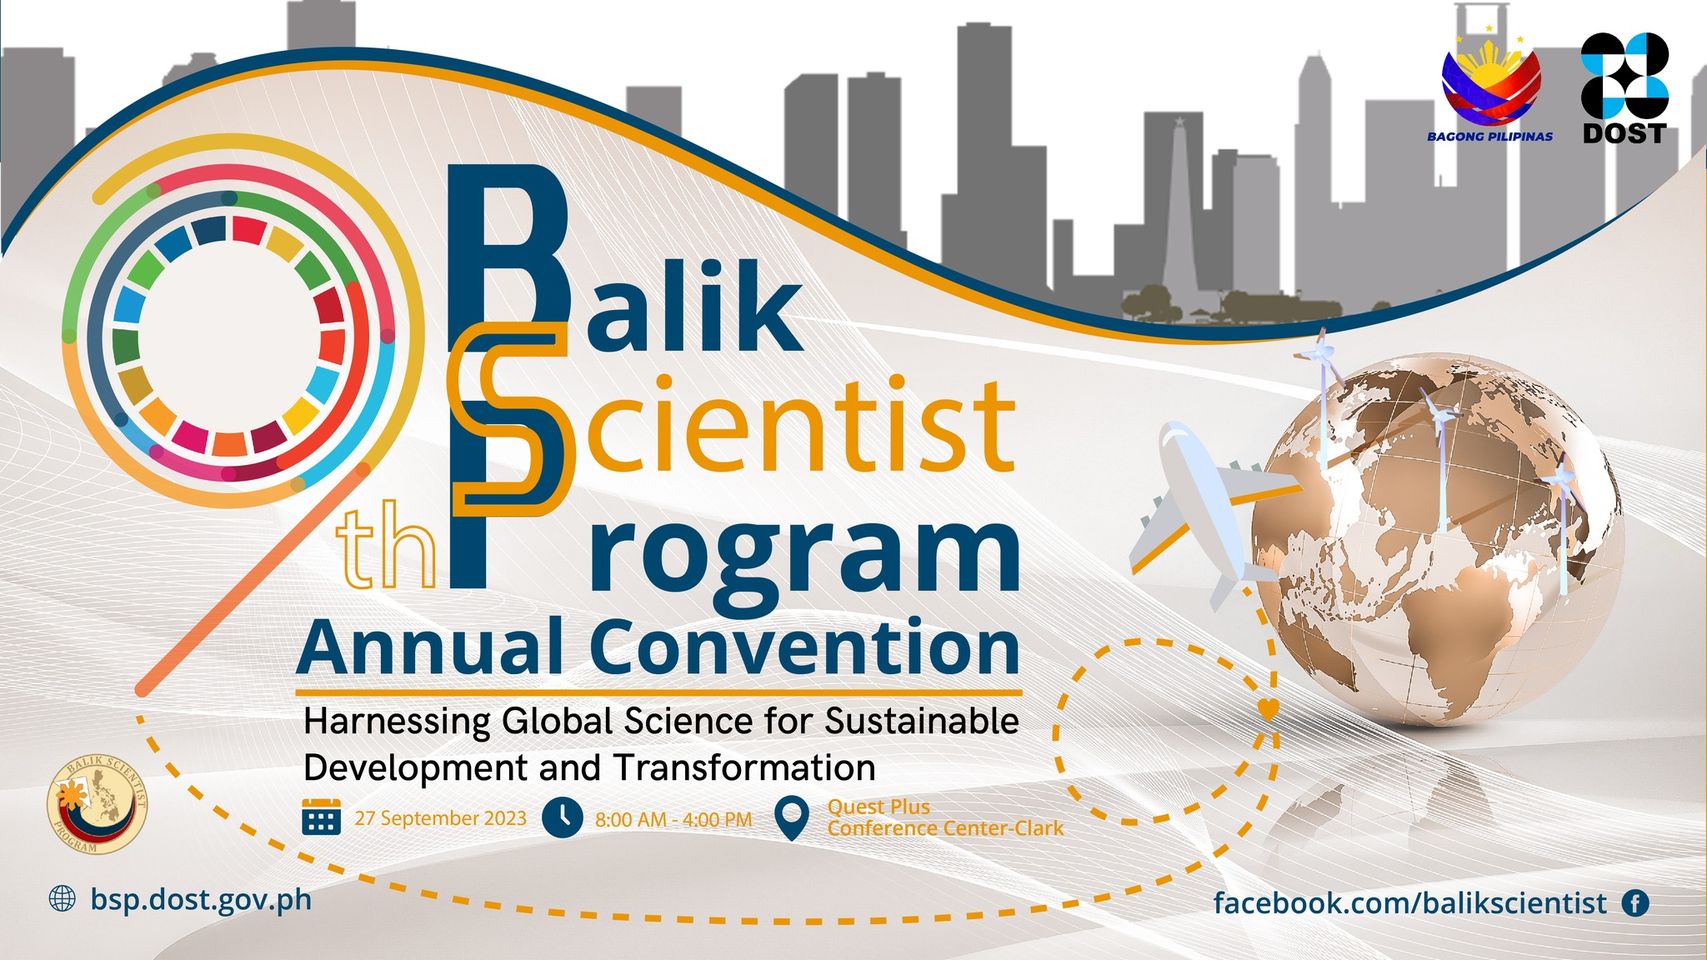 DOST to host 9th Balik Scientist Convention, highlights contributions of Balik Scientists in Sustainable Development